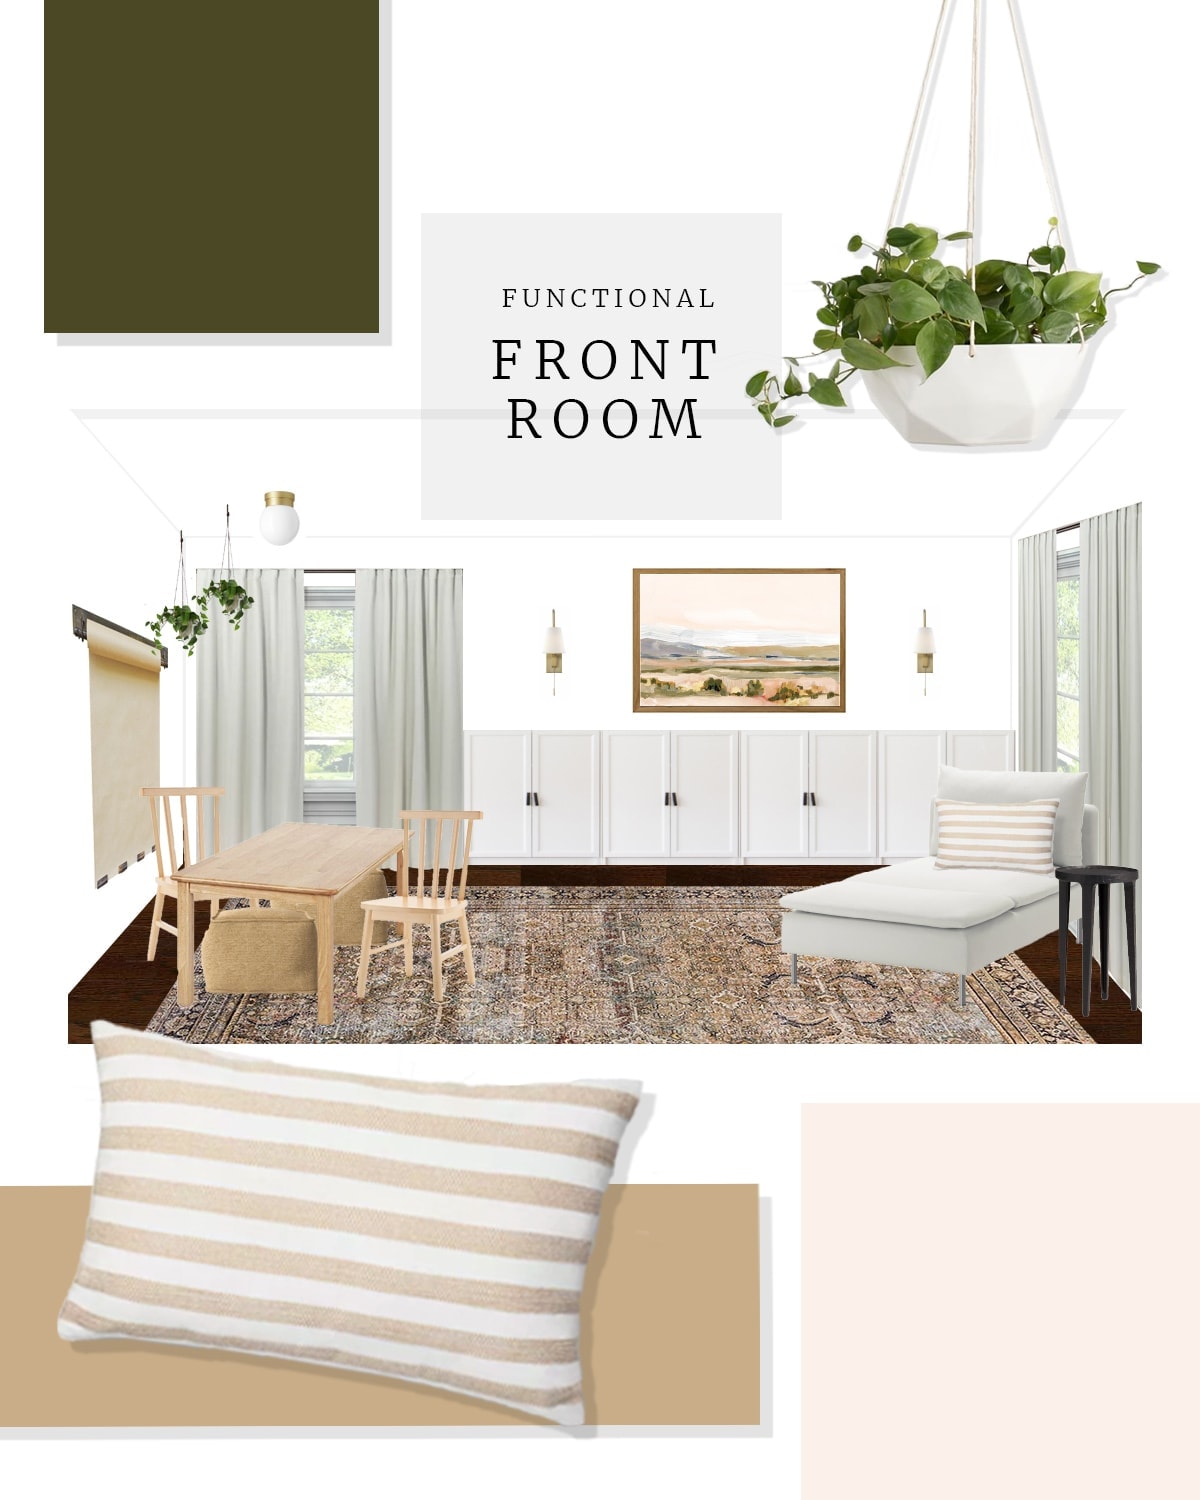 Creating a functional front room